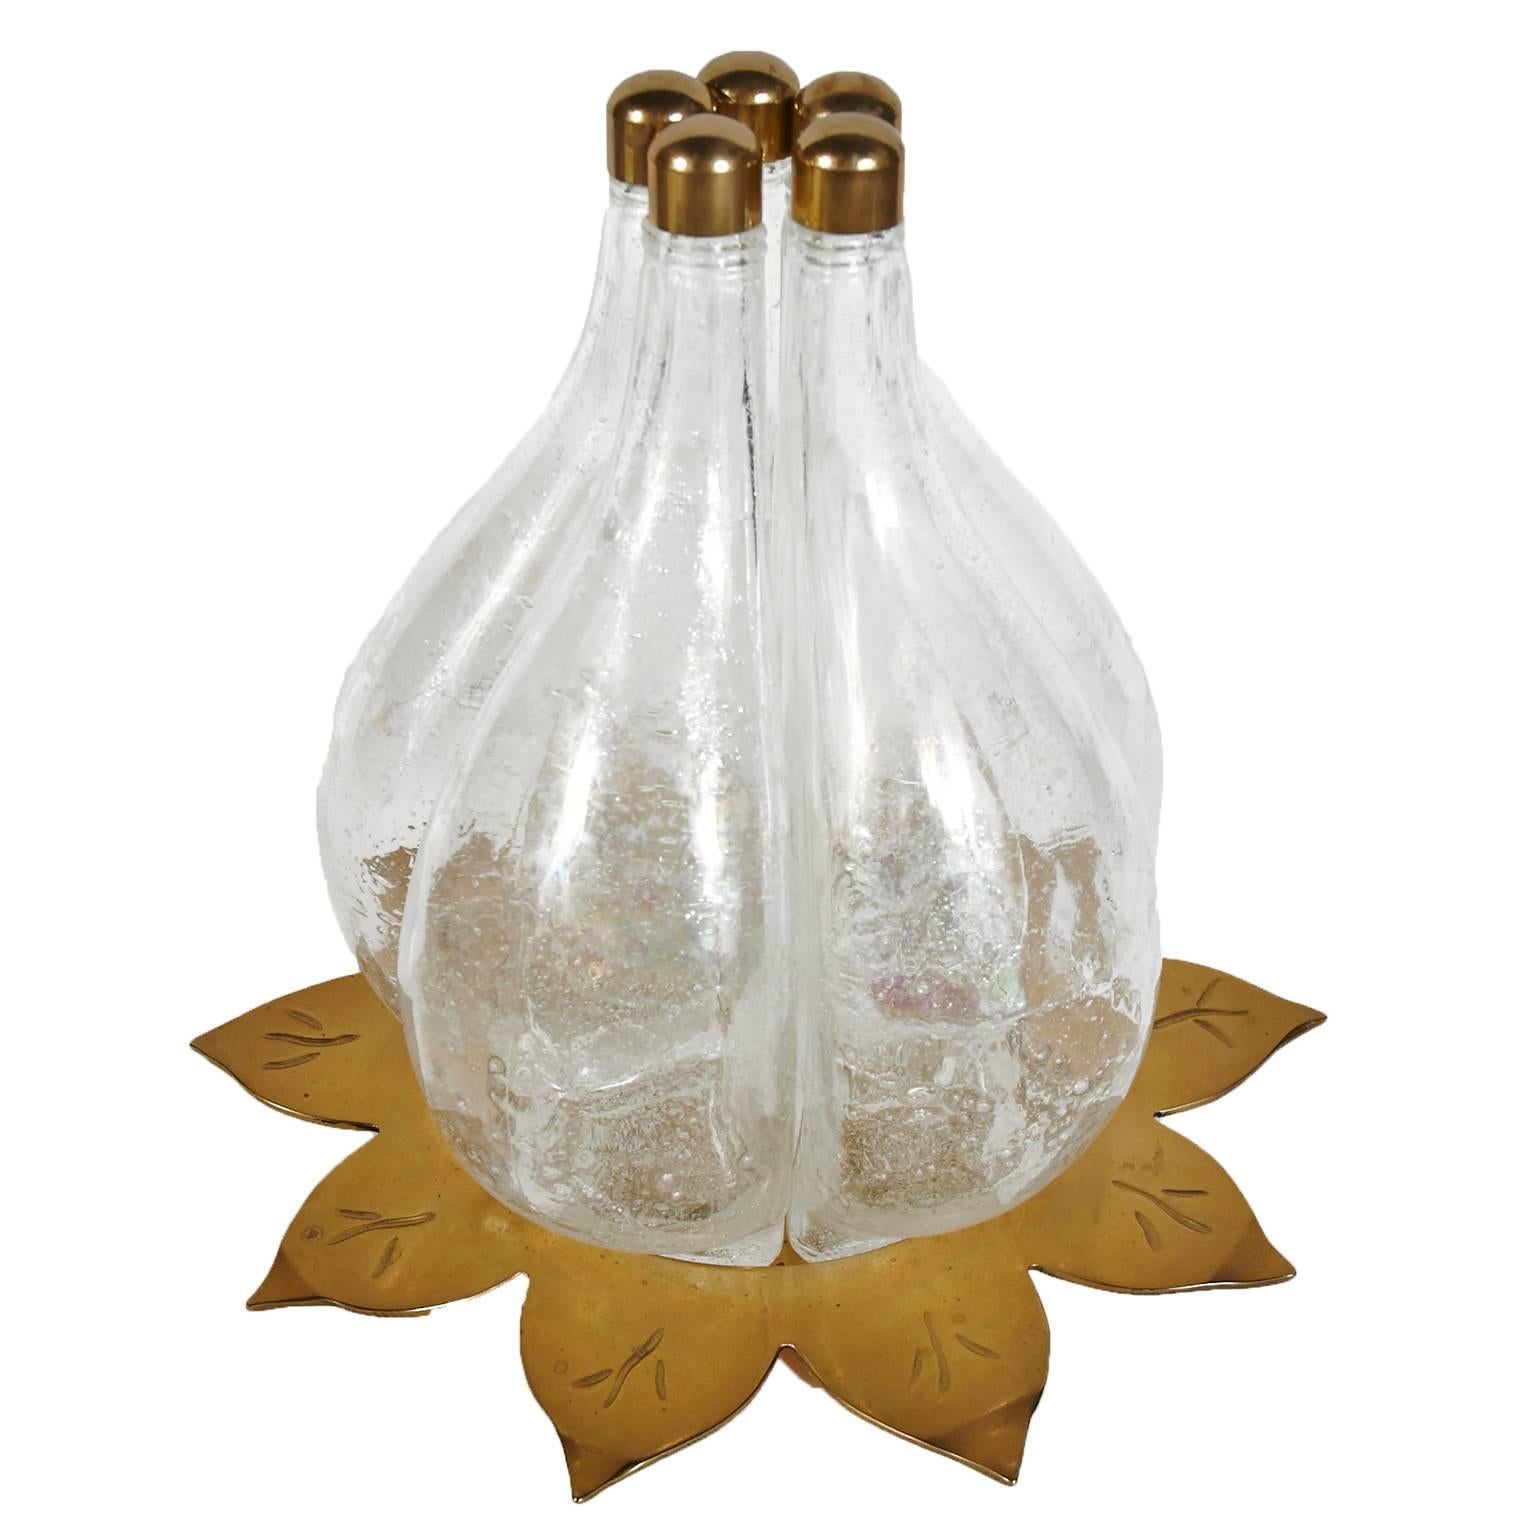 Unique brass and glass wine or beverage decanter. Five separate blown glass containers with brass tops set on top of a brass sunflower shaped holder. These separate pieces fit together and are held in place by the brass sunflower shaped base and the